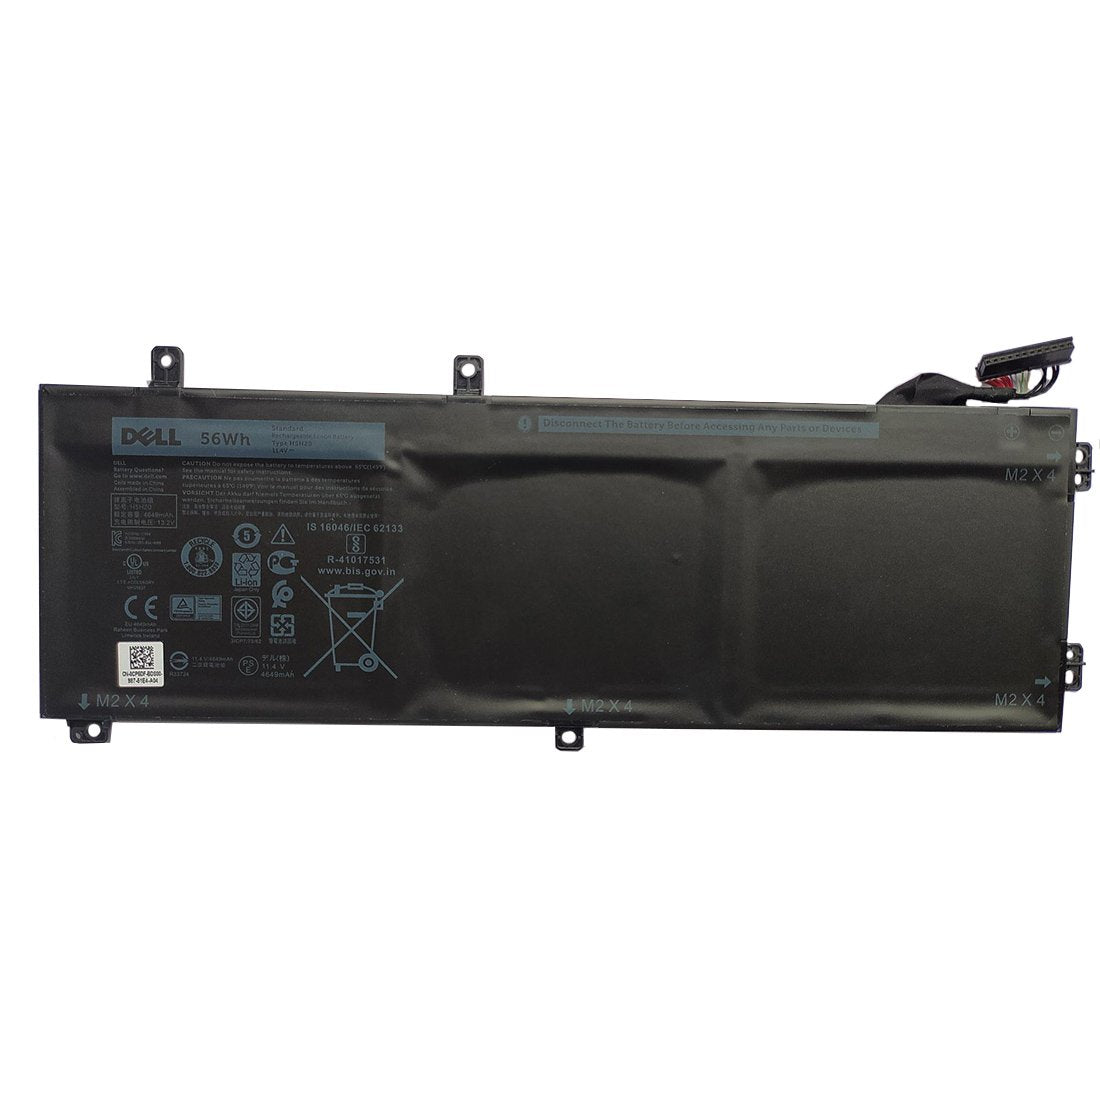 Dell_CP6DF_4649mAh_Original_Laptop_Battery_From_The_Peripheral_Store